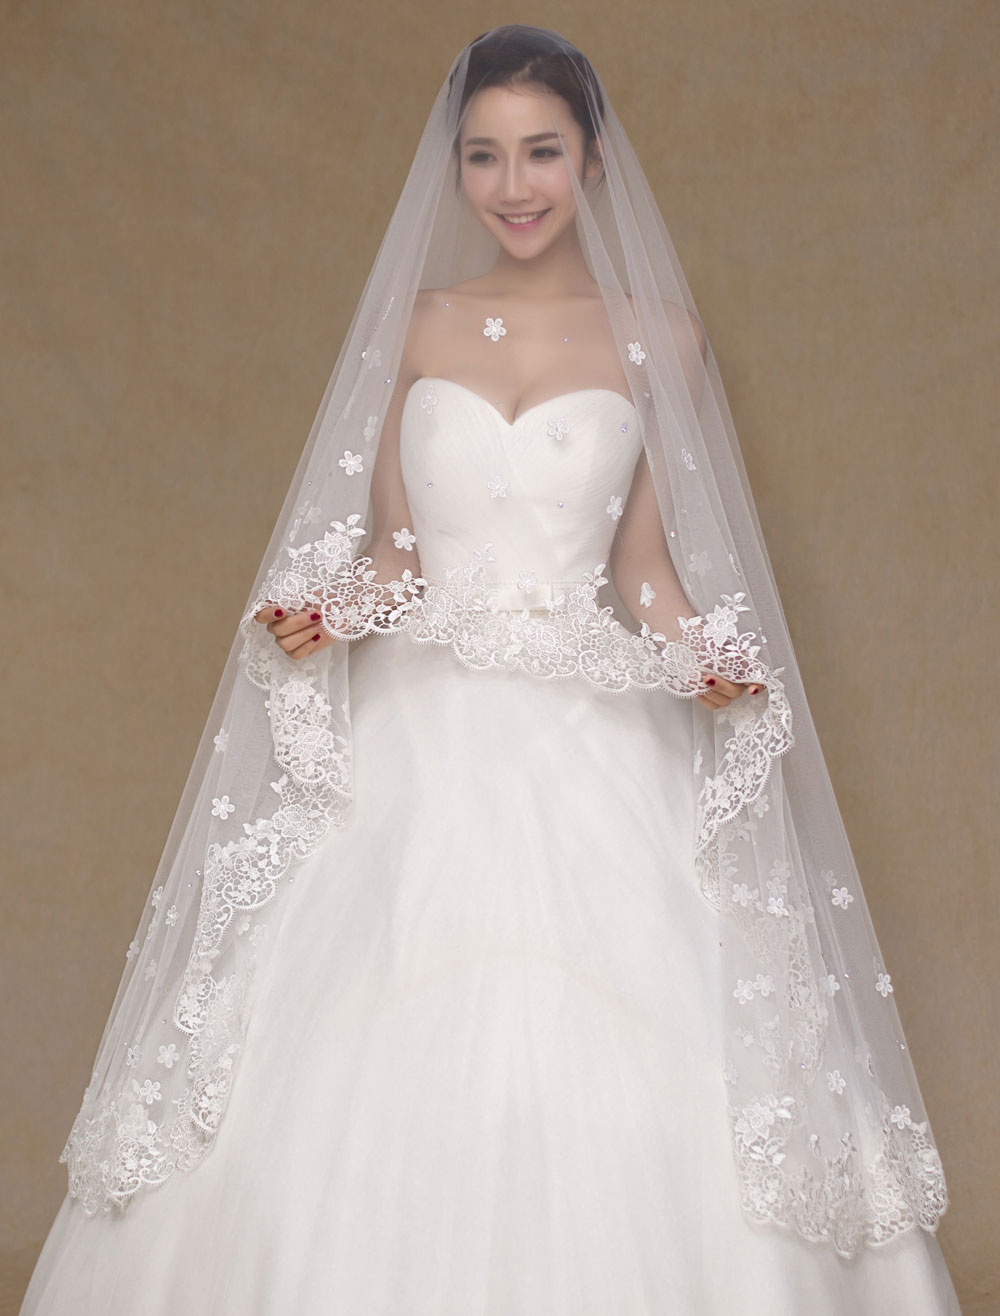 YIPEISHA One Tier Long Elegent Wedding Veil Bridal Veil with Lace Appliques Embroidery ivory